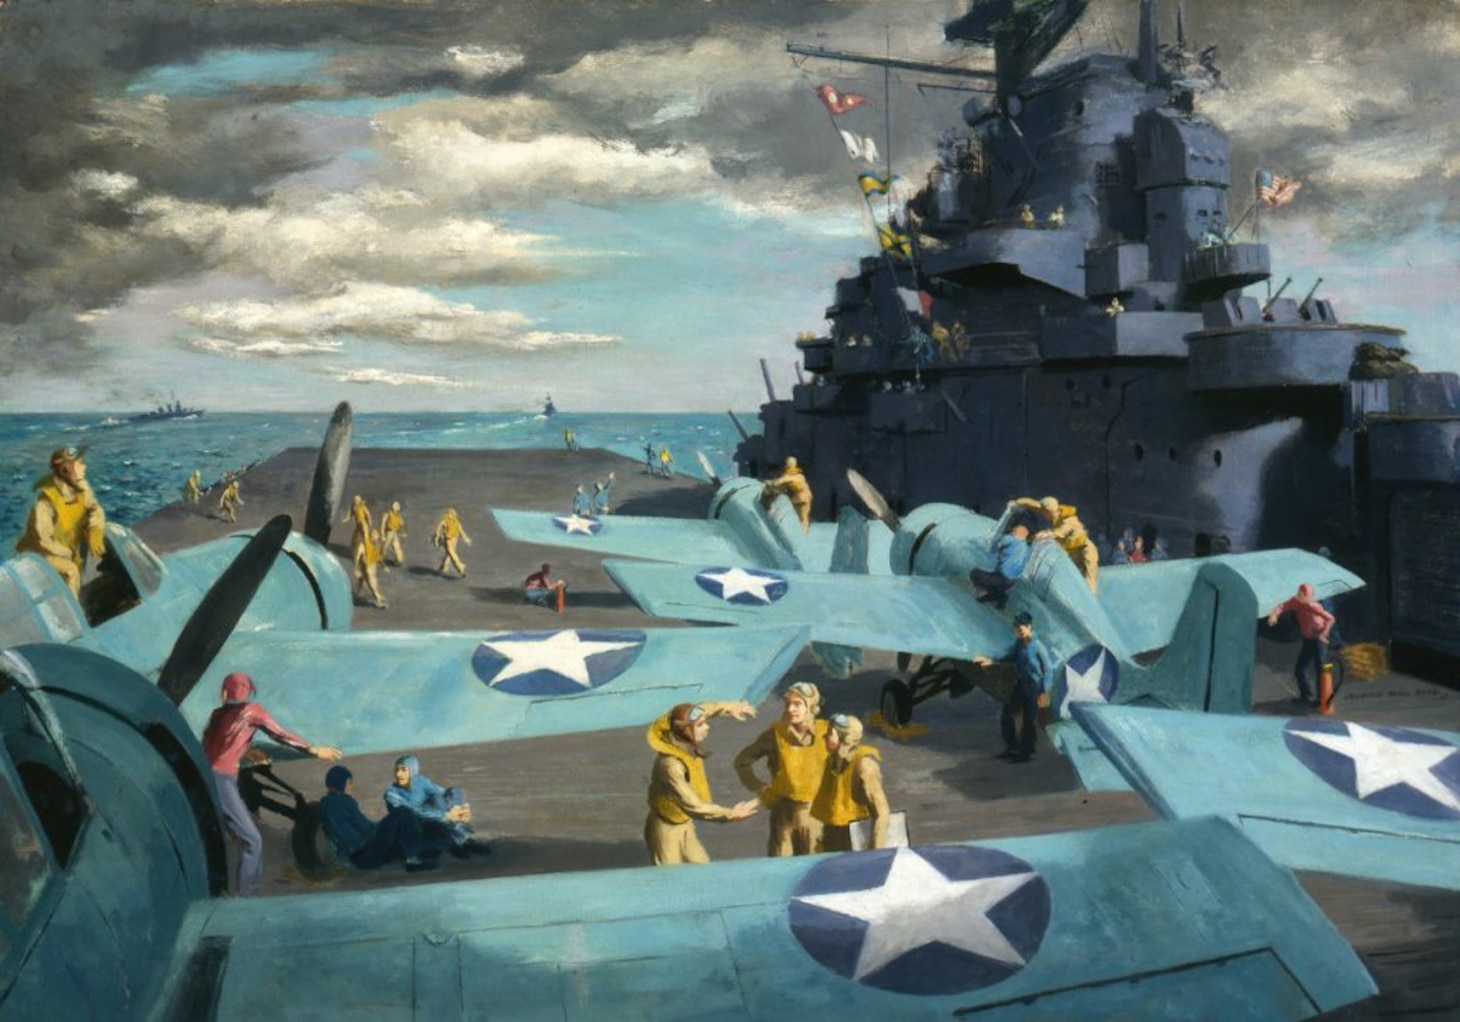 Battle of Midway Anniversary Mission